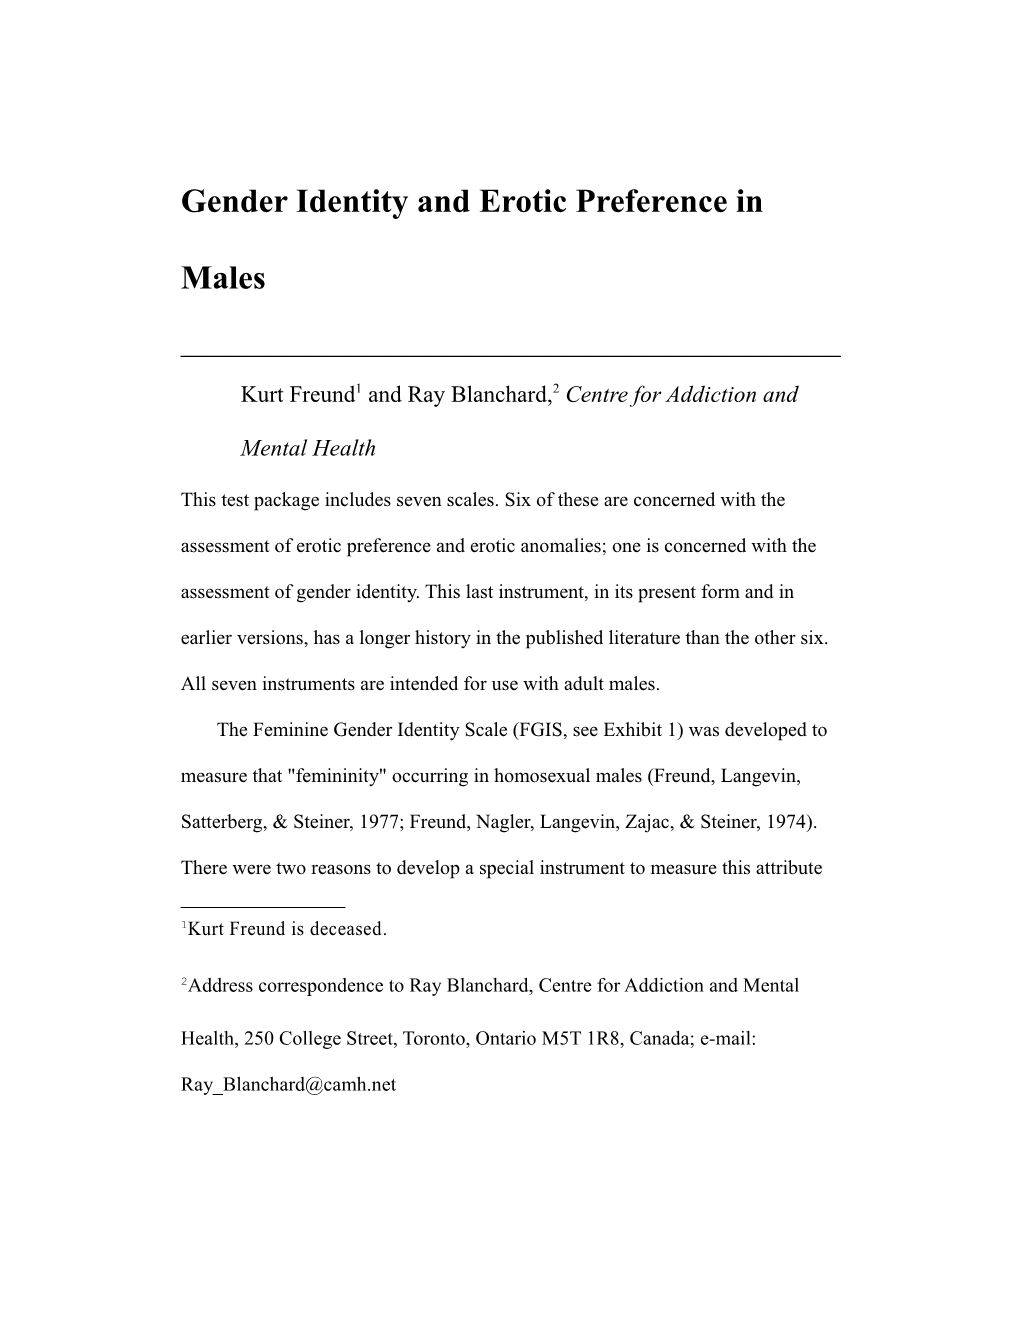 Gender Identity and Erotic Preference in Males